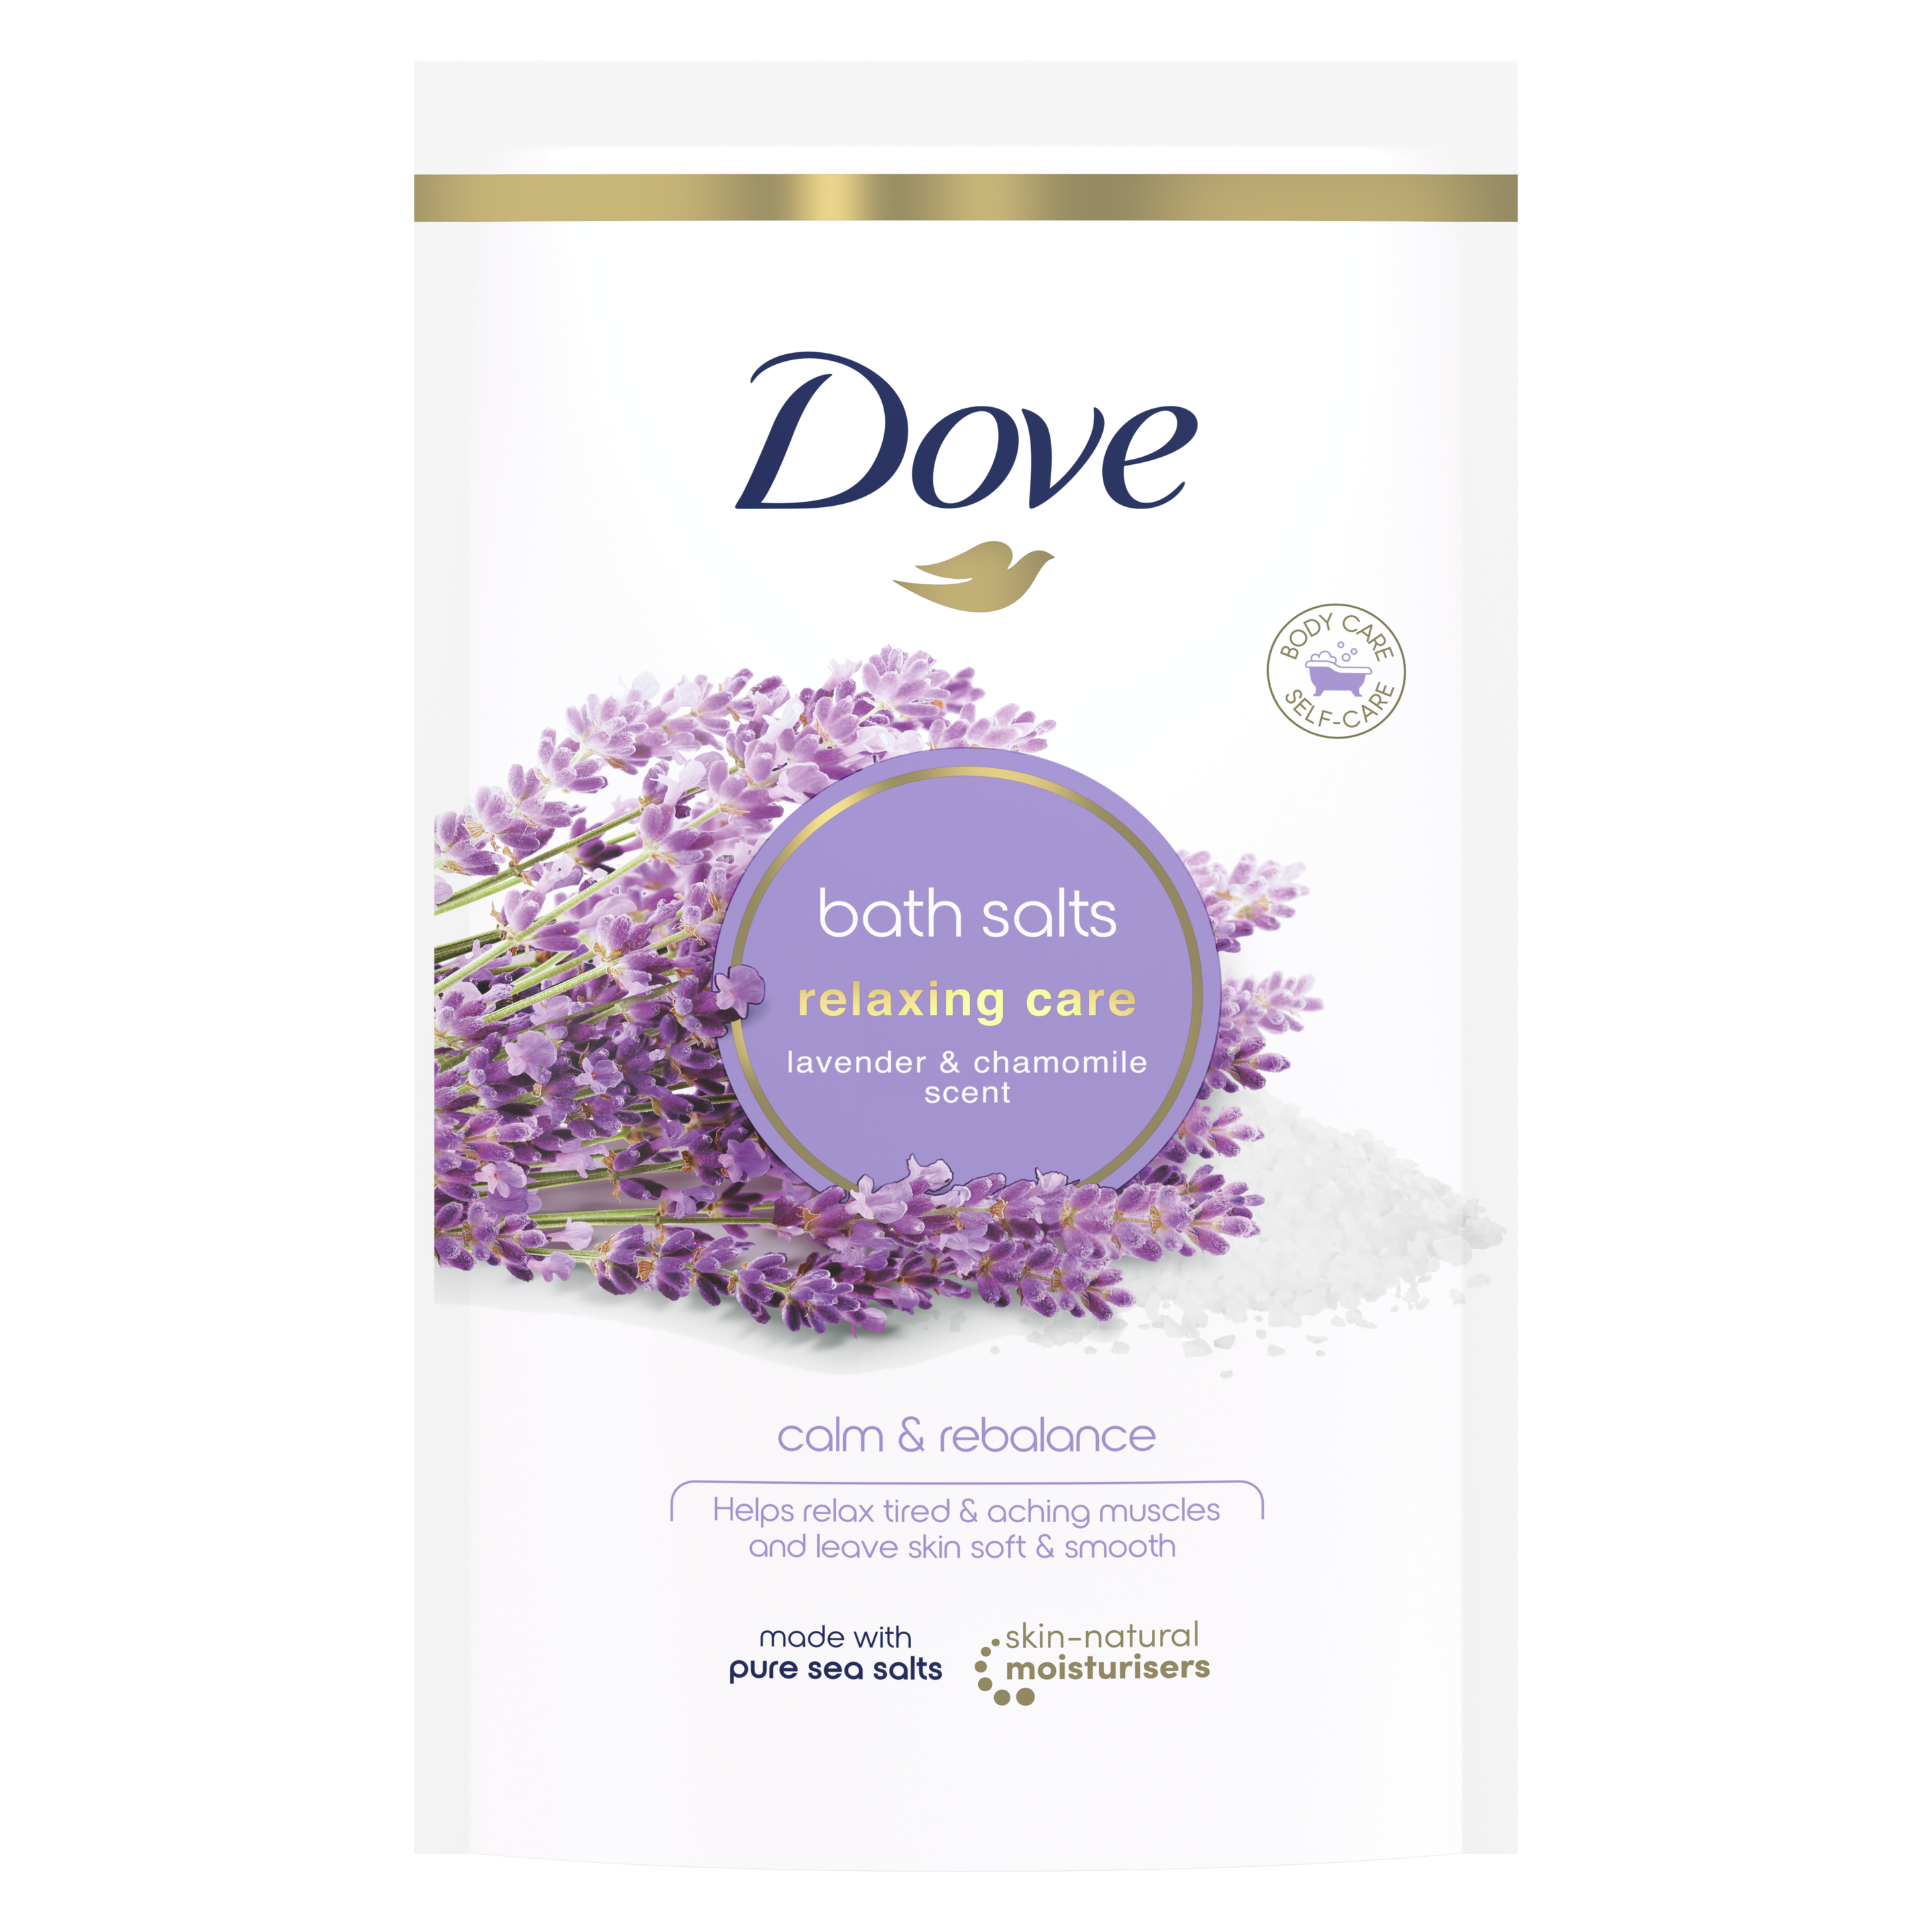 Dove Lavender & Chamomile Relaxing Care Bath Salts 900g